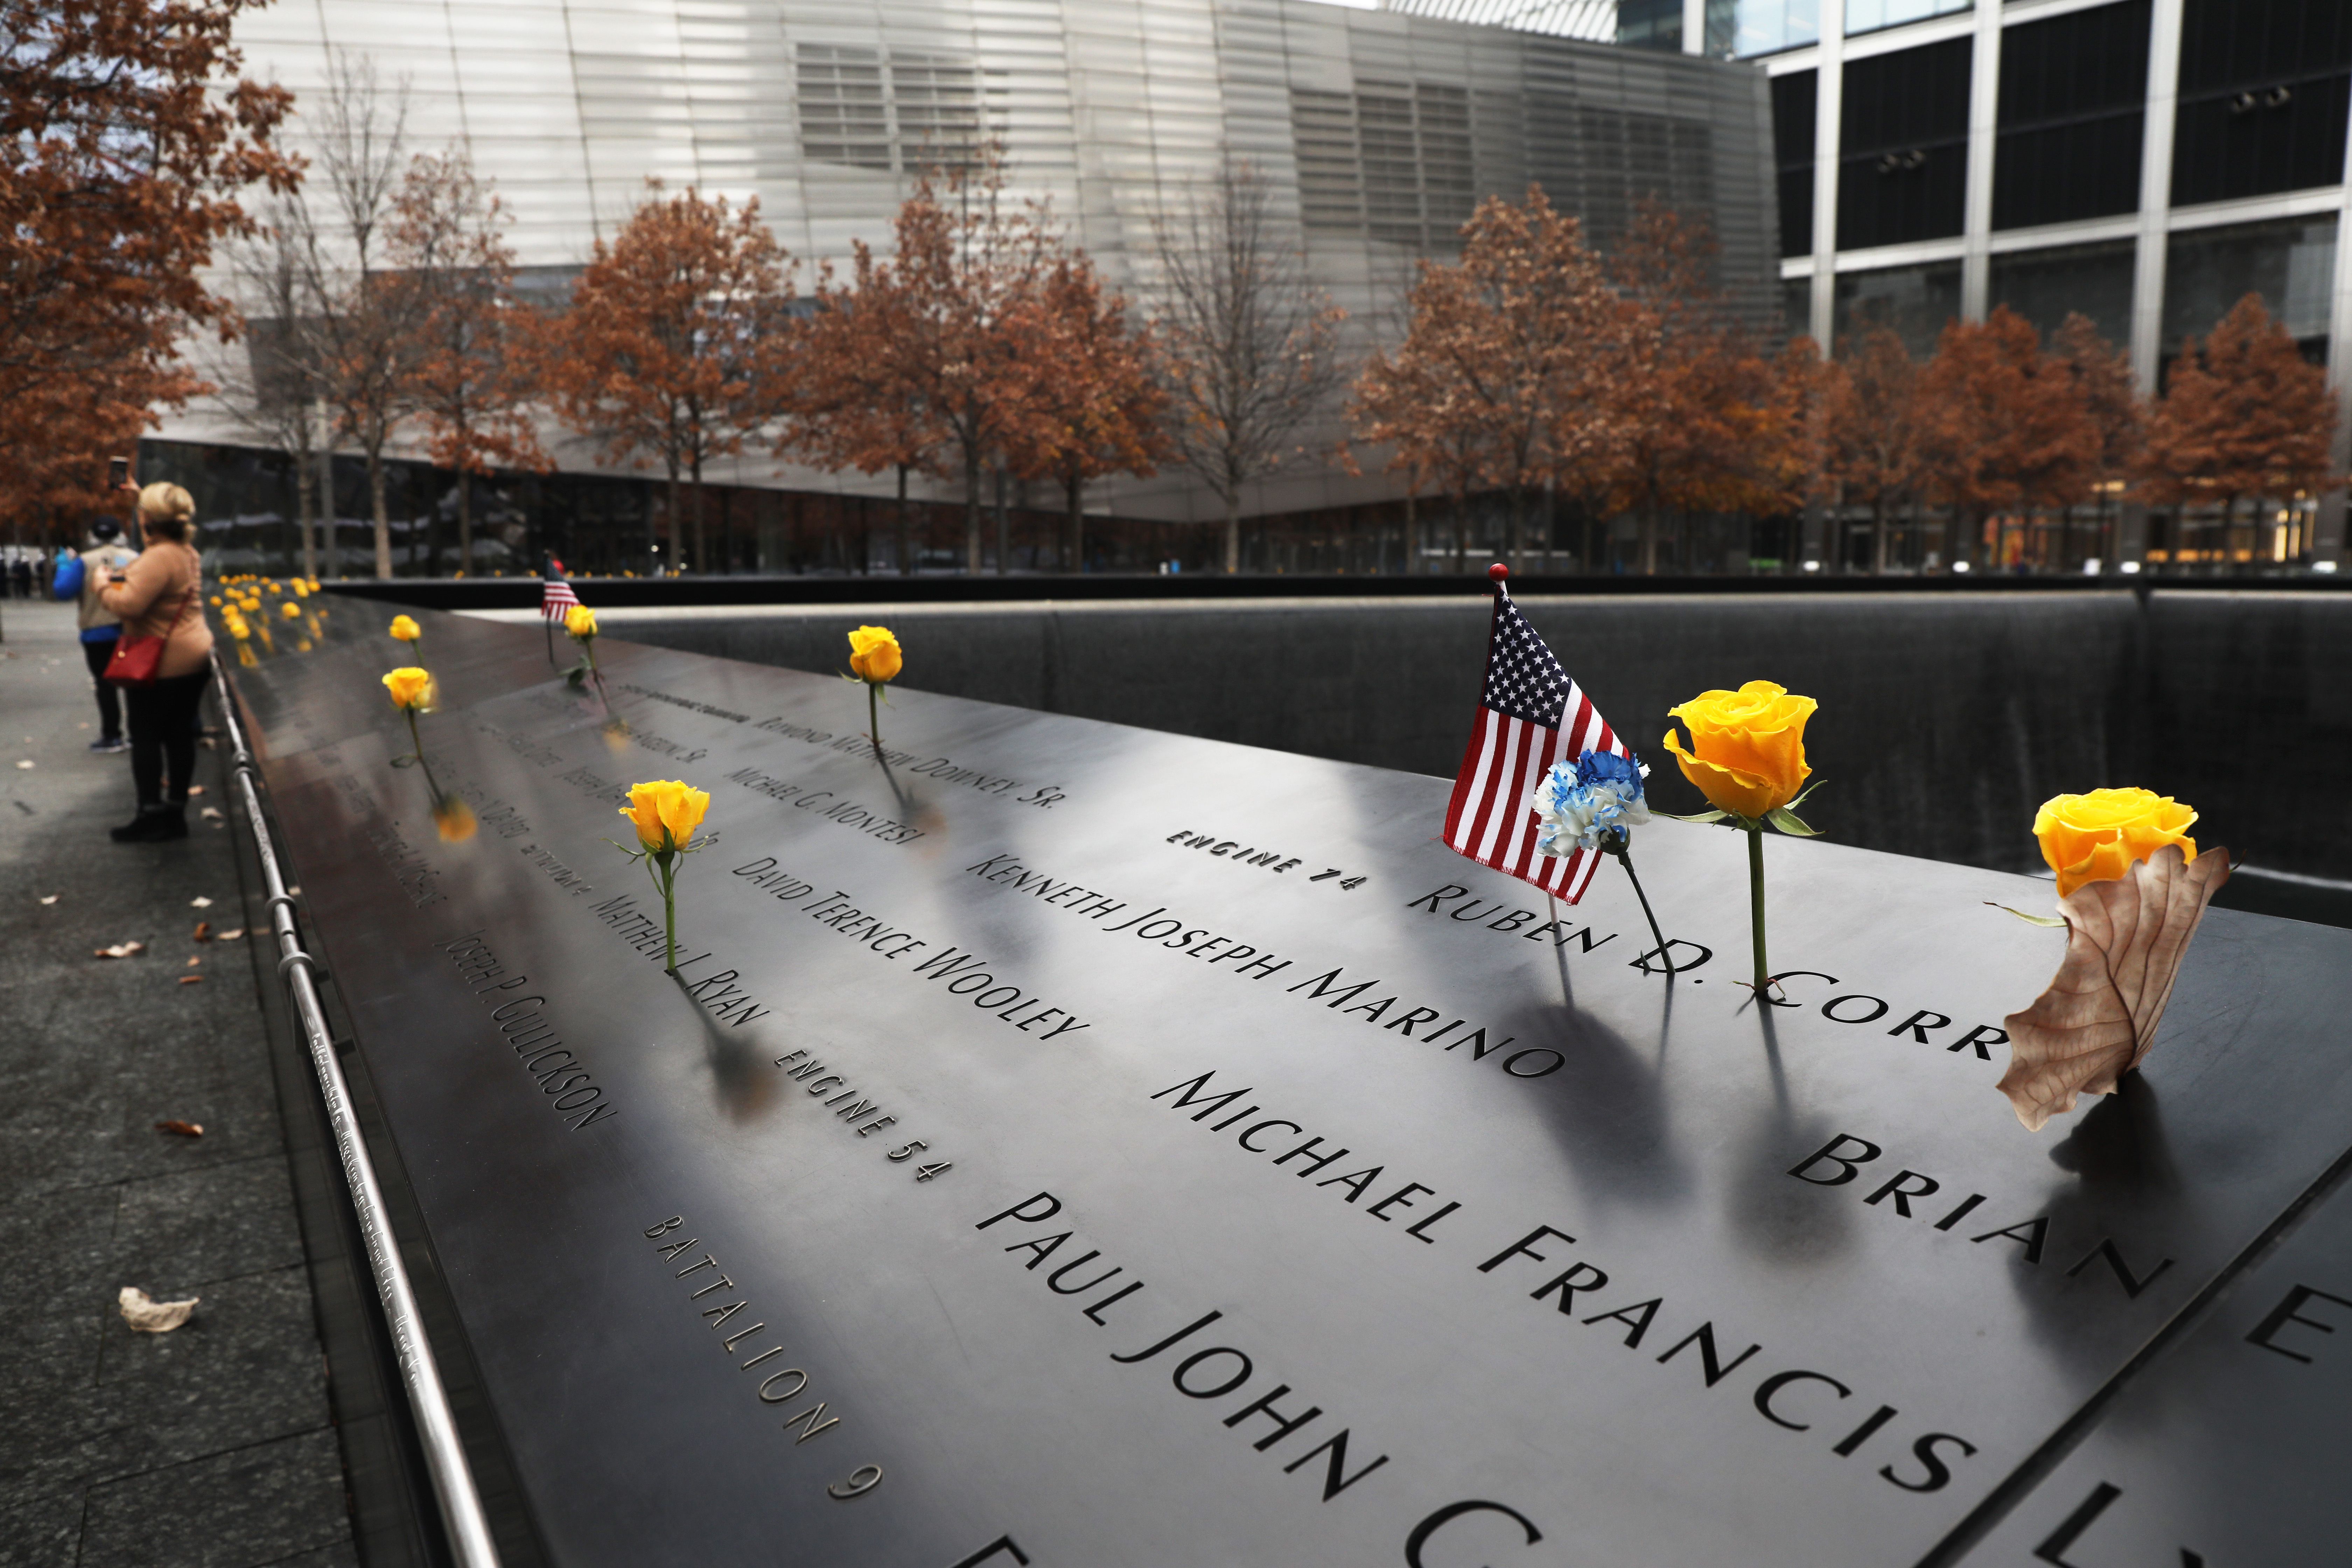 Flowers and flags are placed on the names of veterans killed in the attacks on September 11 at the memorial at Ground Zero on Veterans Day on November 11, 2020 in New York City. 